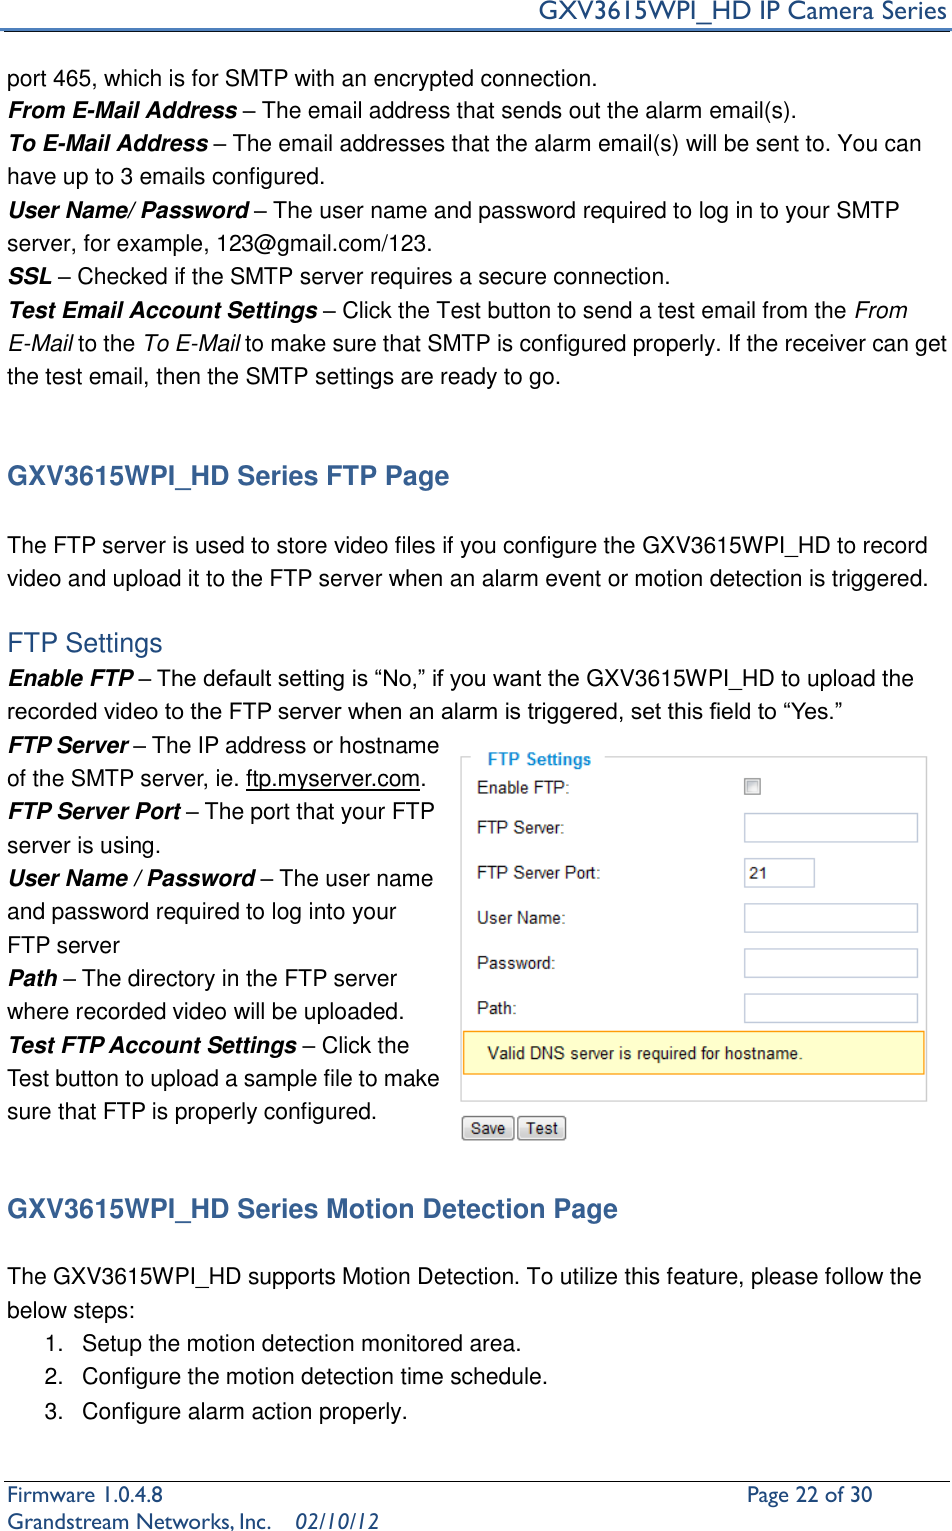     GXV3615WPI_HD IP Camera Series Firmware 1.0.4.8                                                   Page 22 of 30     Grandstream Networks, Inc.  02/10/12  port 465, which is for SMTP with an encrypted connection. From E-Mail Address – The email address that sends out the alarm email(s). To E-Mail Address – The email addresses that the alarm email(s) will be sent to. You can have up to 3 emails configured. User Name/ Password – The user name and password required to log in to your SMTP server, for example, 123@gmail.com/123. SSL – Checked if the SMTP server requires a secure connection. Test Email Account Settings – Click the Test button to send a test email from the From E-Mail to the To E-Mail to make sure that SMTP is configured properly. If the receiver can get the test email, then the SMTP settings are ready to go.     GXV3615WPI_HD Series FTP Page  The FTP server is used to store video files if you configure the GXV3615WPI_HD to record video and upload it to the FTP server when an alarm event or motion detection is triggered.  FTP Settings Enable FTP – The default setting is “No,” if you want the GXV3615WPI_HD to upload the recorded video to the FTP server when an alarm is triggered, set this field to “Yes.” FTP Server – The IP address or hostname of the SMTP server, ie. ftp.myserver.com. FTP Server Port – The port that your FTP server is using. User Name / Password – The user name and password required to log into your FTP server Path – The directory in the FTP server where recorded video will be uploaded. Test FTP Account Settings – Click the Test button to upload a sample file to make sure that FTP is properly configured.   GXV3615WPI_HD Series Motion Detection Page  The GXV3615WPI_HD supports Motion Detection. To utilize this feature, please follow the below steps:   1.  Setup the motion detection monitored area.   2.  Configure the motion detection time schedule. 3.  Configure alarm action properly.  